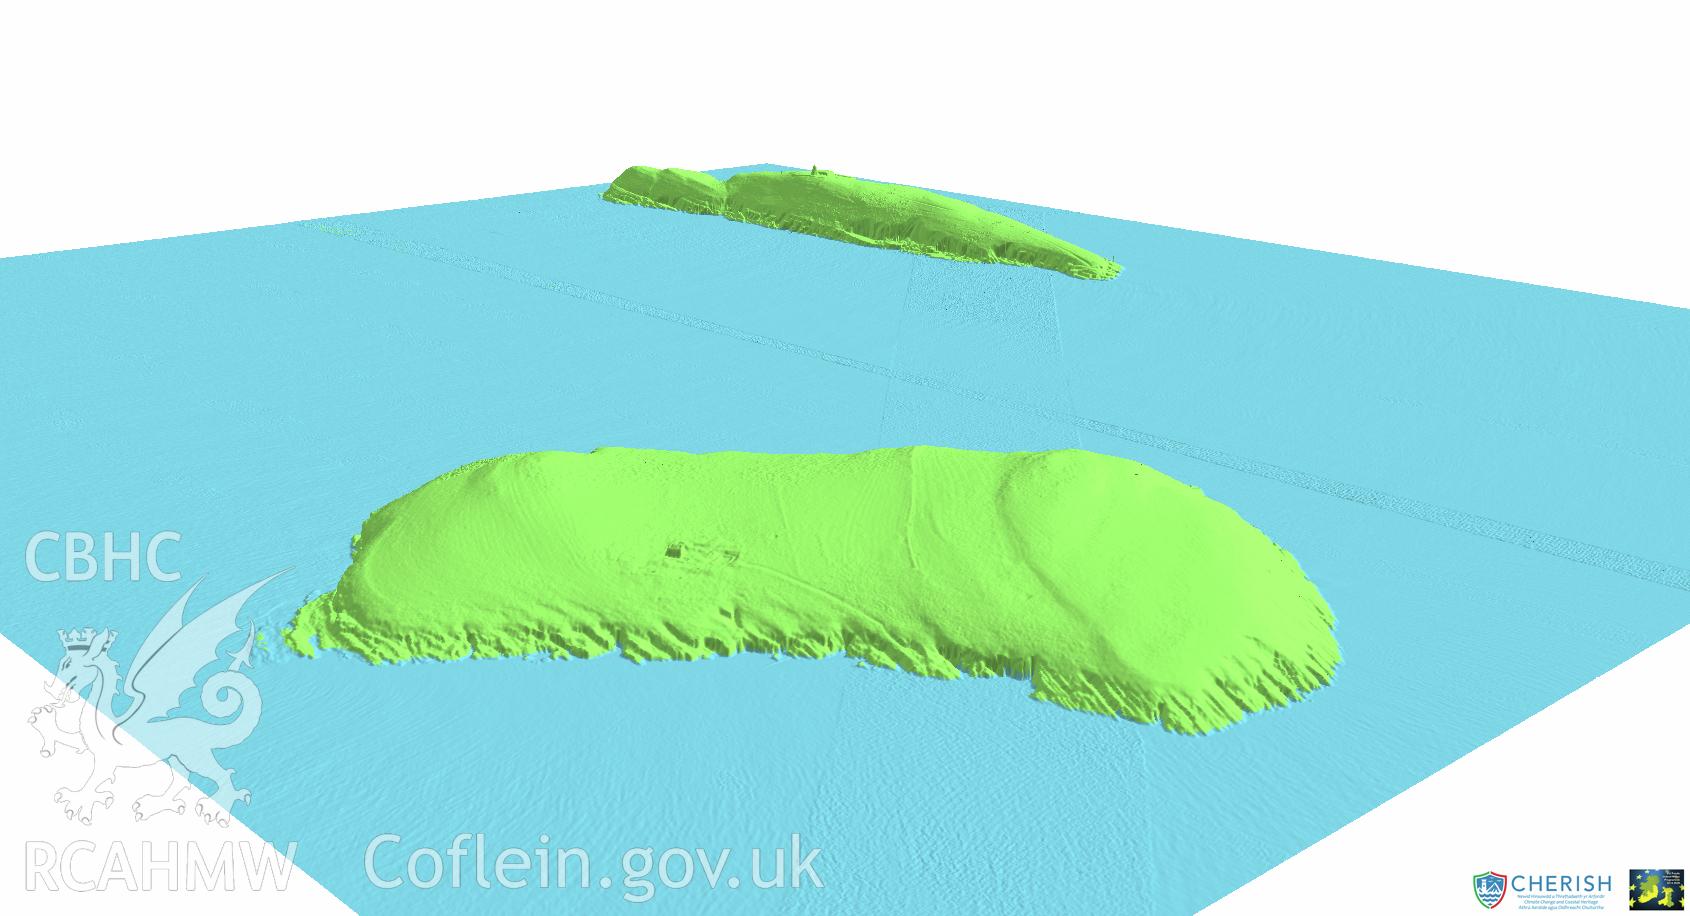 Ynysoedd Tudwal (St. Tudwal?s Islands). Airborne laser scanning (LiDAR) commissioned by the CHERISH Project 2017-2021, flown by Bluesky International LTD at low tide on 24th February 2017. View showing both islands